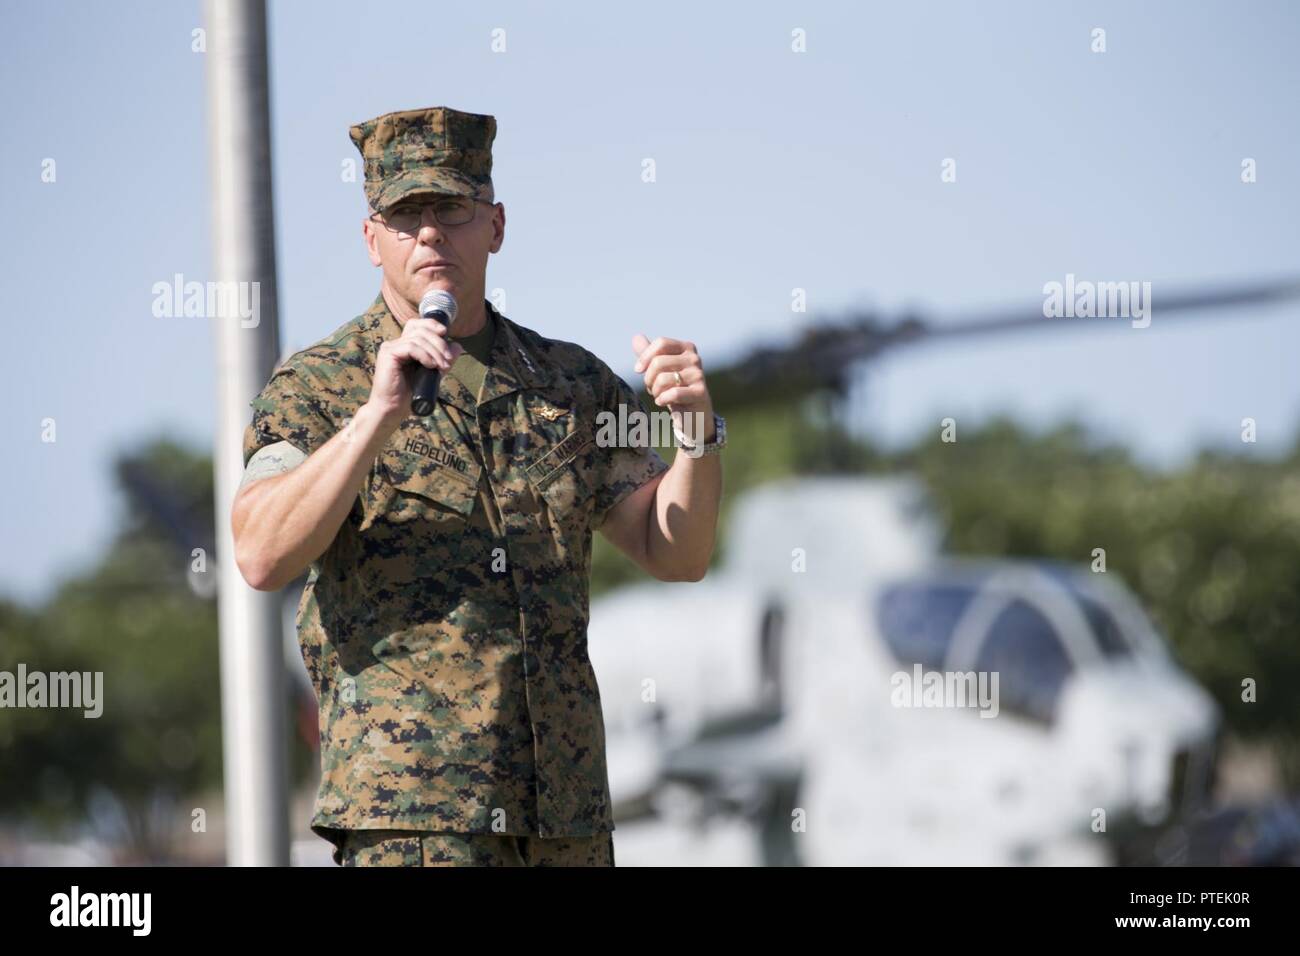 U.S. Marine Corps Lt. Gen. Robert F. Hedelund, commanding general of the II Marine Expeditionary Force (MEF), speaks to the audience during the II Marine Expeditionary Force (II MEF) change of command ceremony on Camp Lejeune, N.C., July 14, 2017. During the ceremony, Maj. Gen. Walter L. Miller Jr. relinquished his command as commanding general of II MEF to Lt. Gen. Hedelund. Stock Photo